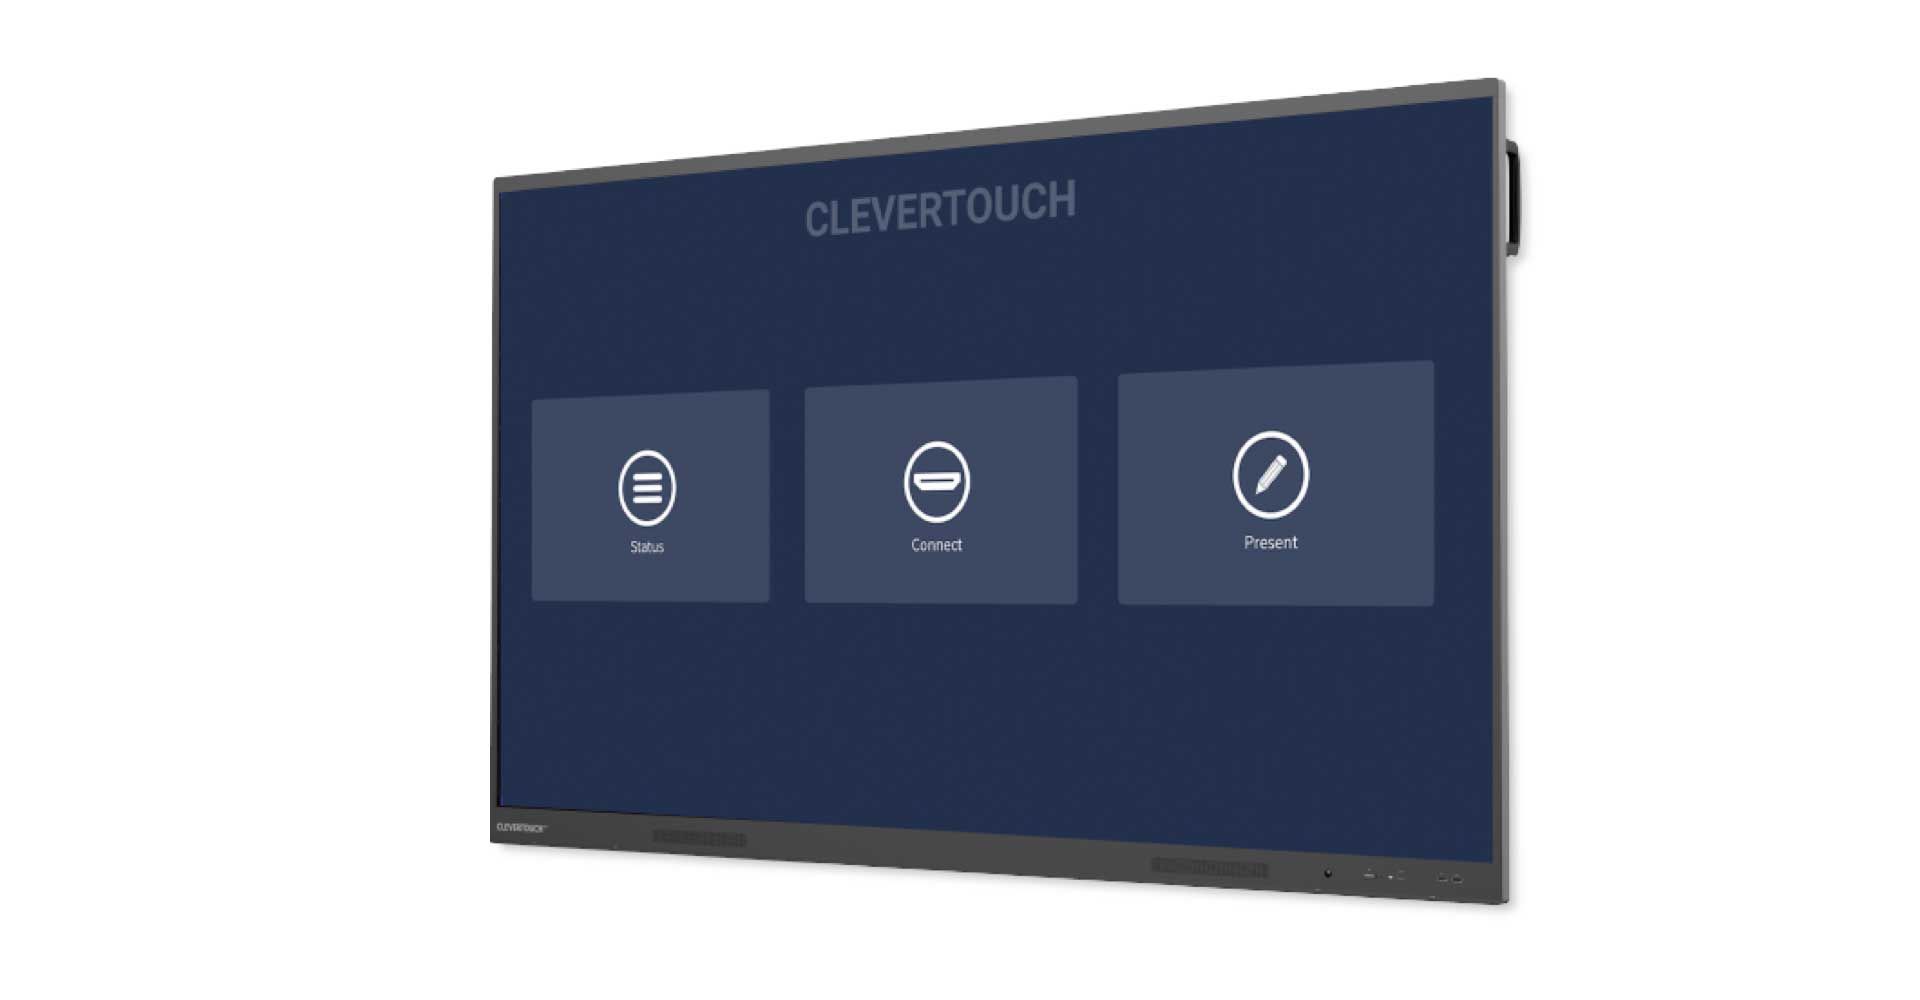 clevertouch